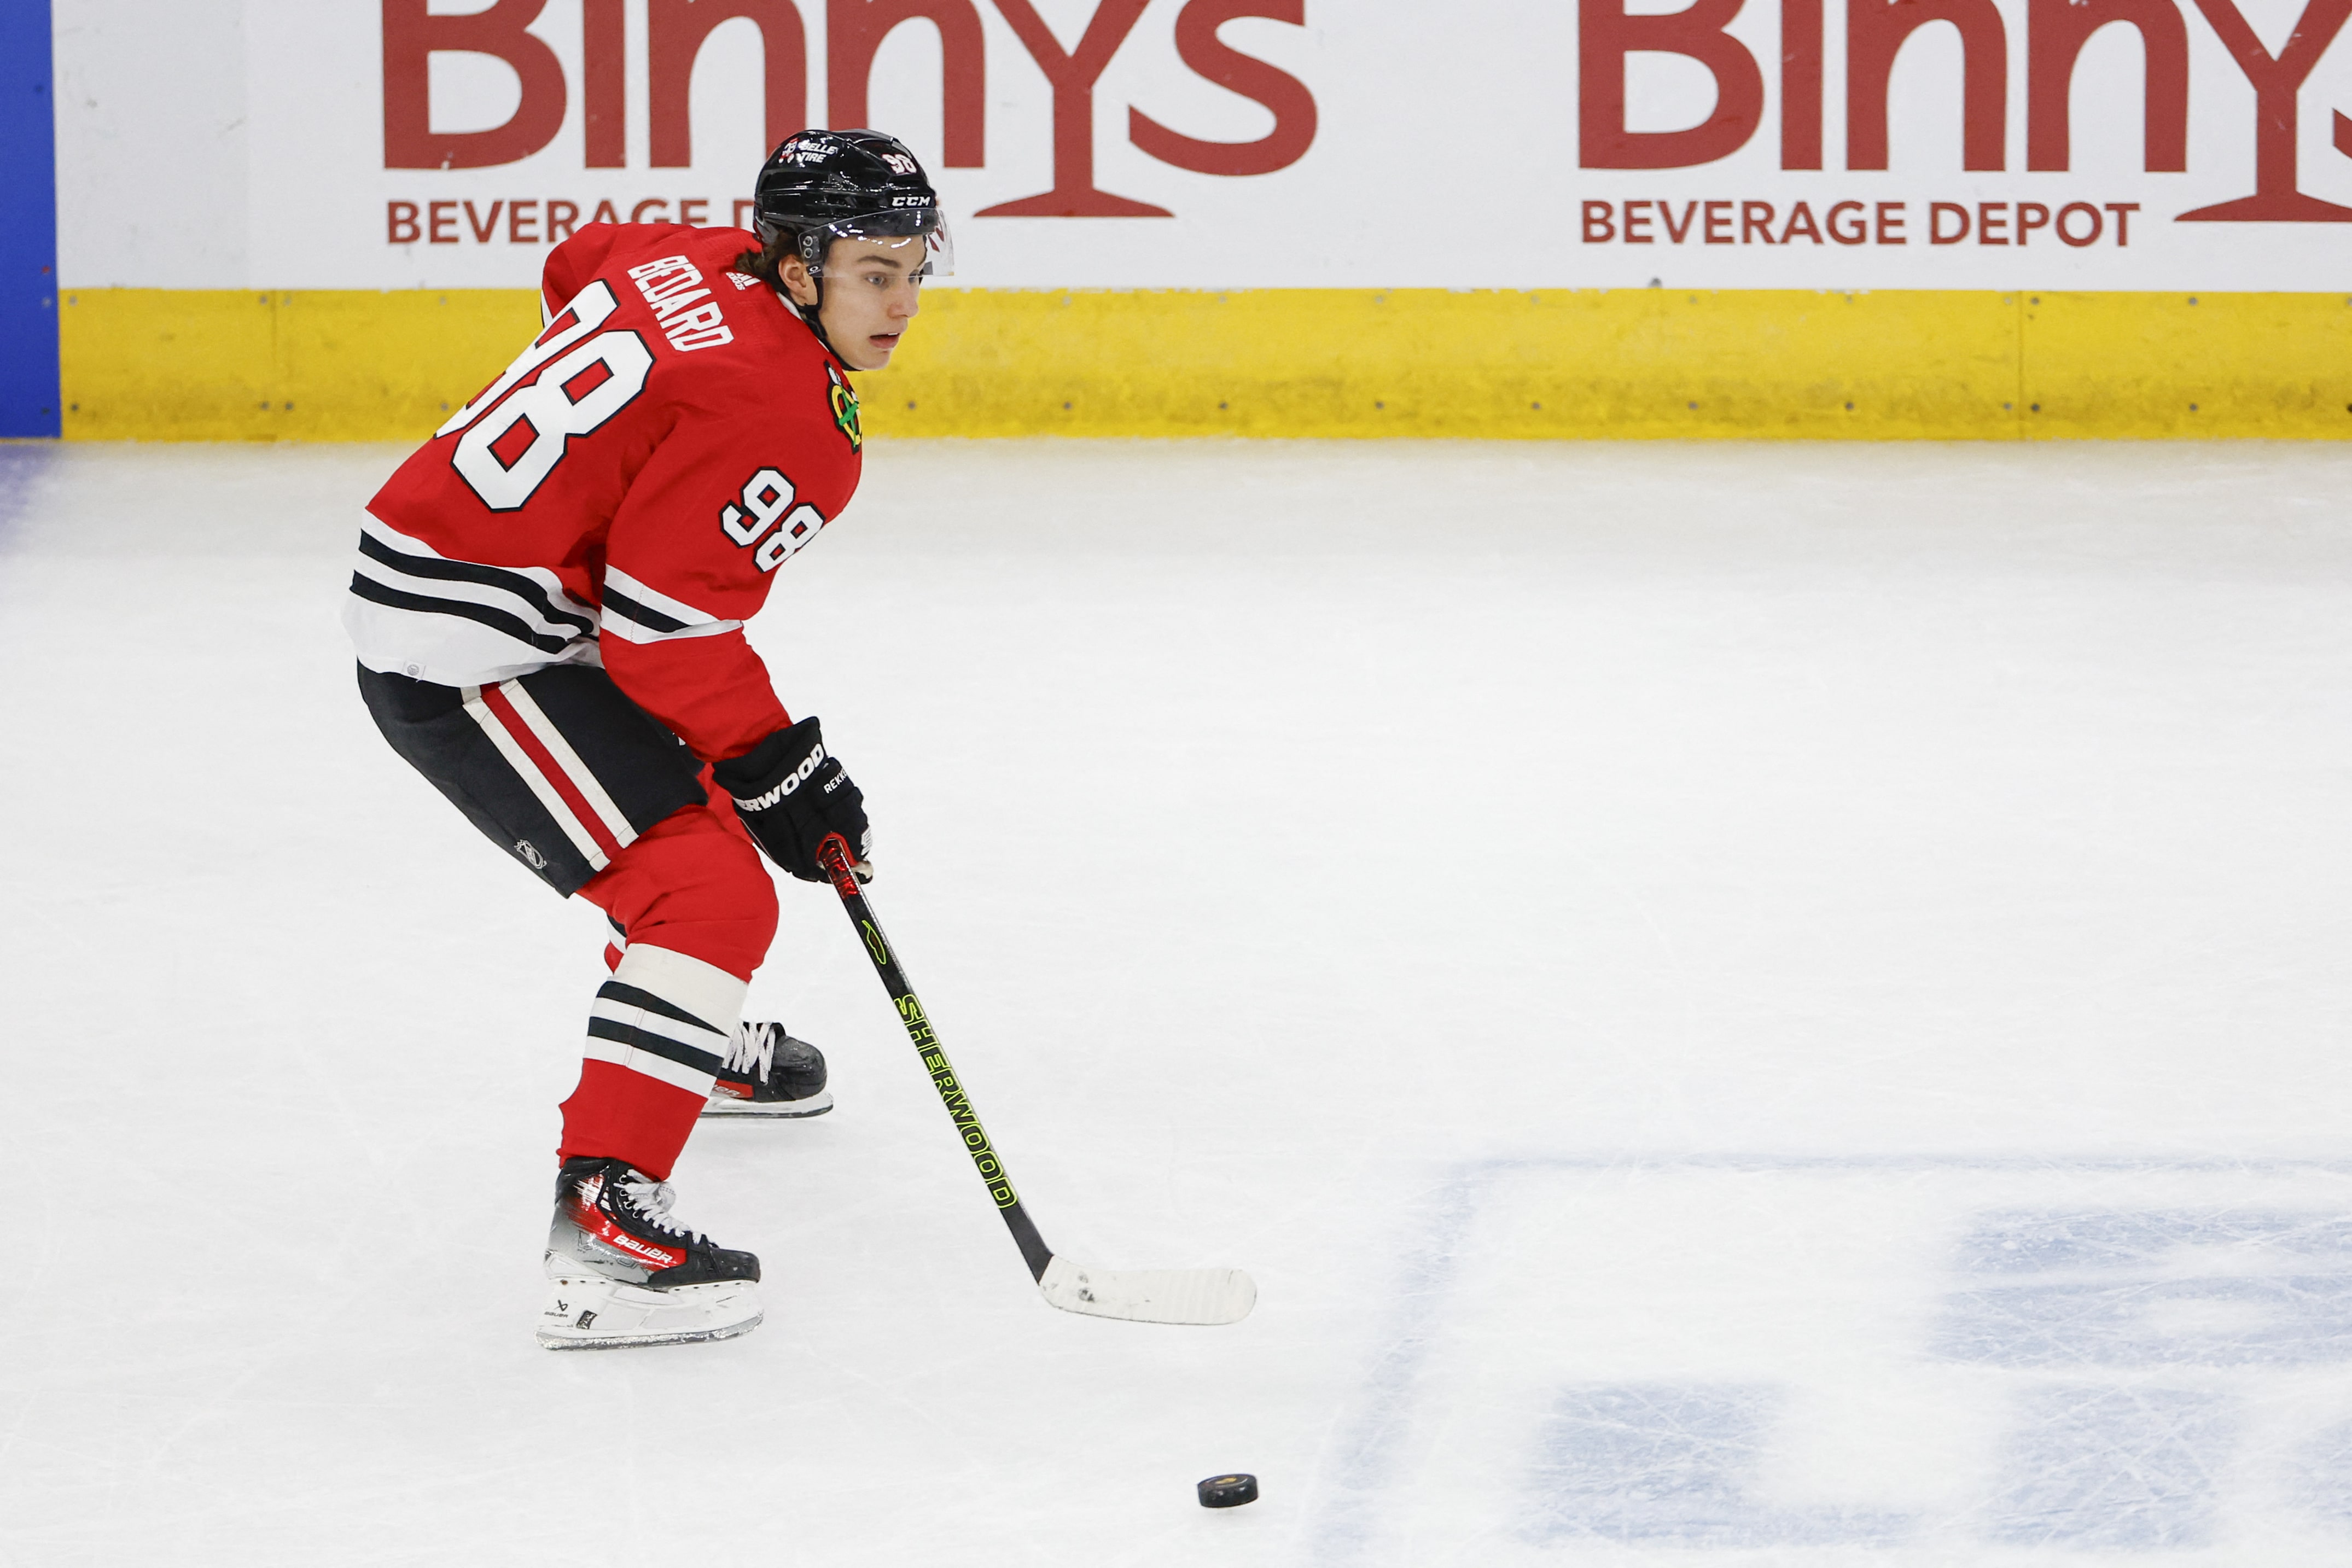 The Connor Bedard circus has made NHL hockey matter again in Chicago